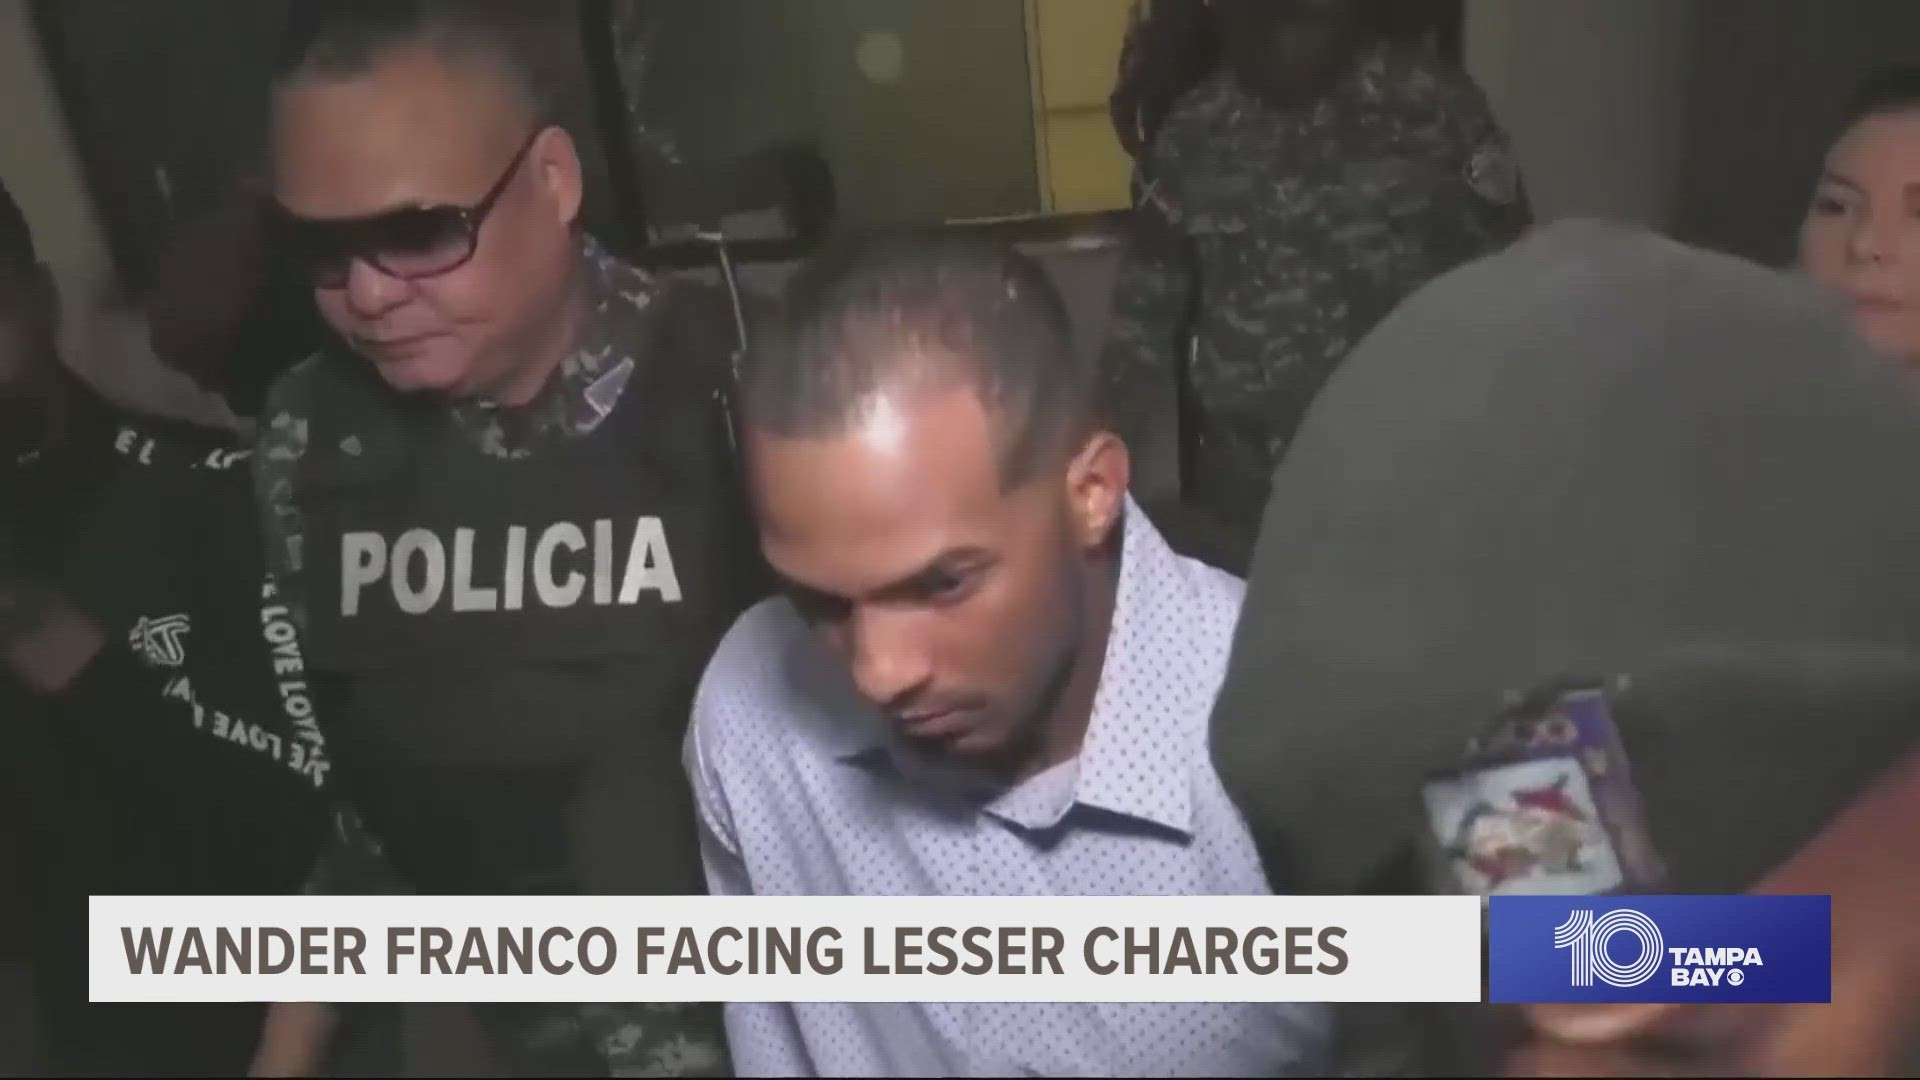 Franco has not been formally accused, but if found guilty on the new charge, he could face between two to five years in prison.